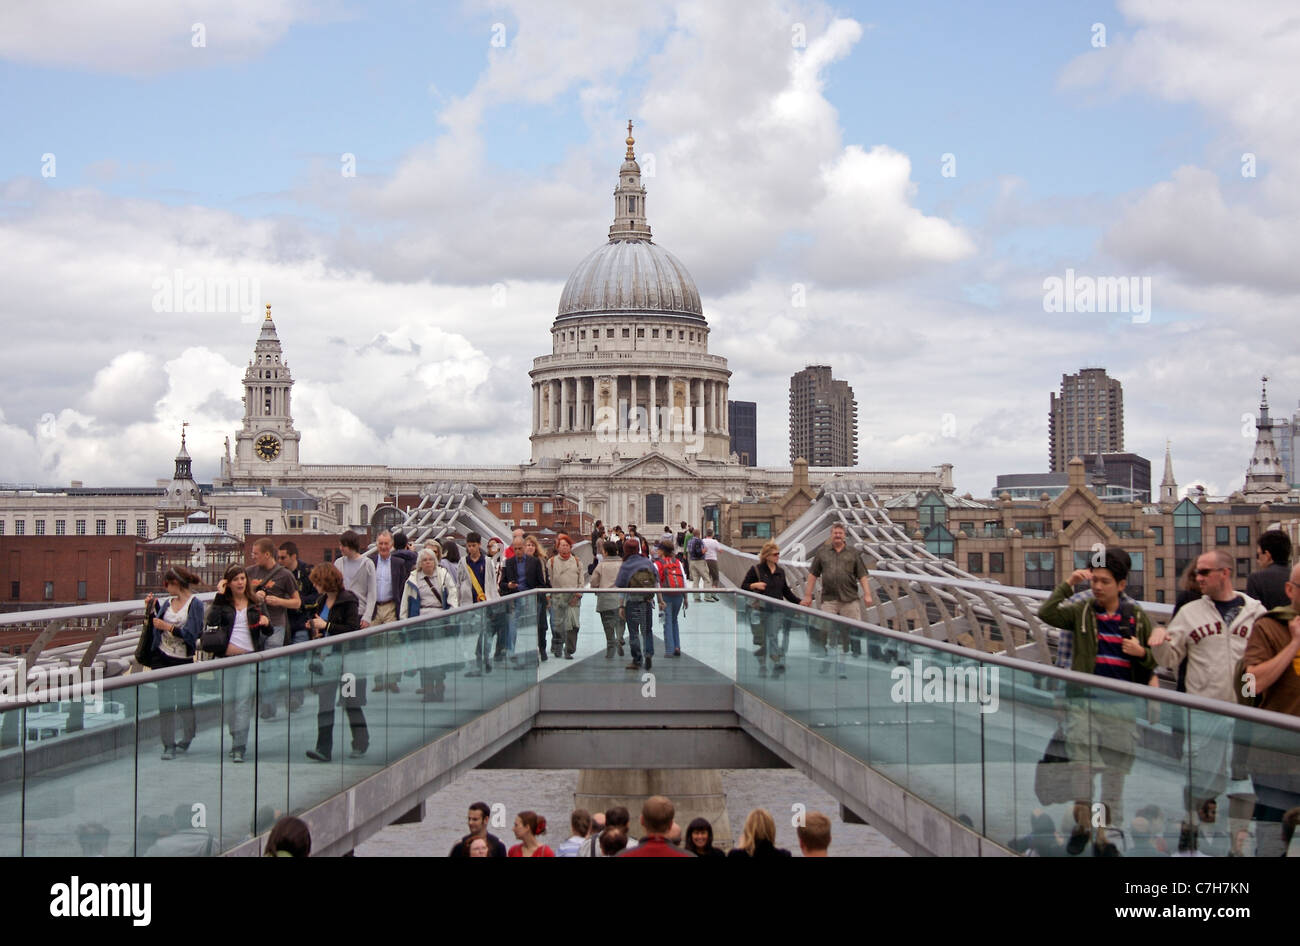 The London Millennium Footbridge crossing from Bankside towards St Paul's Cathedral in London, England Stock Photo